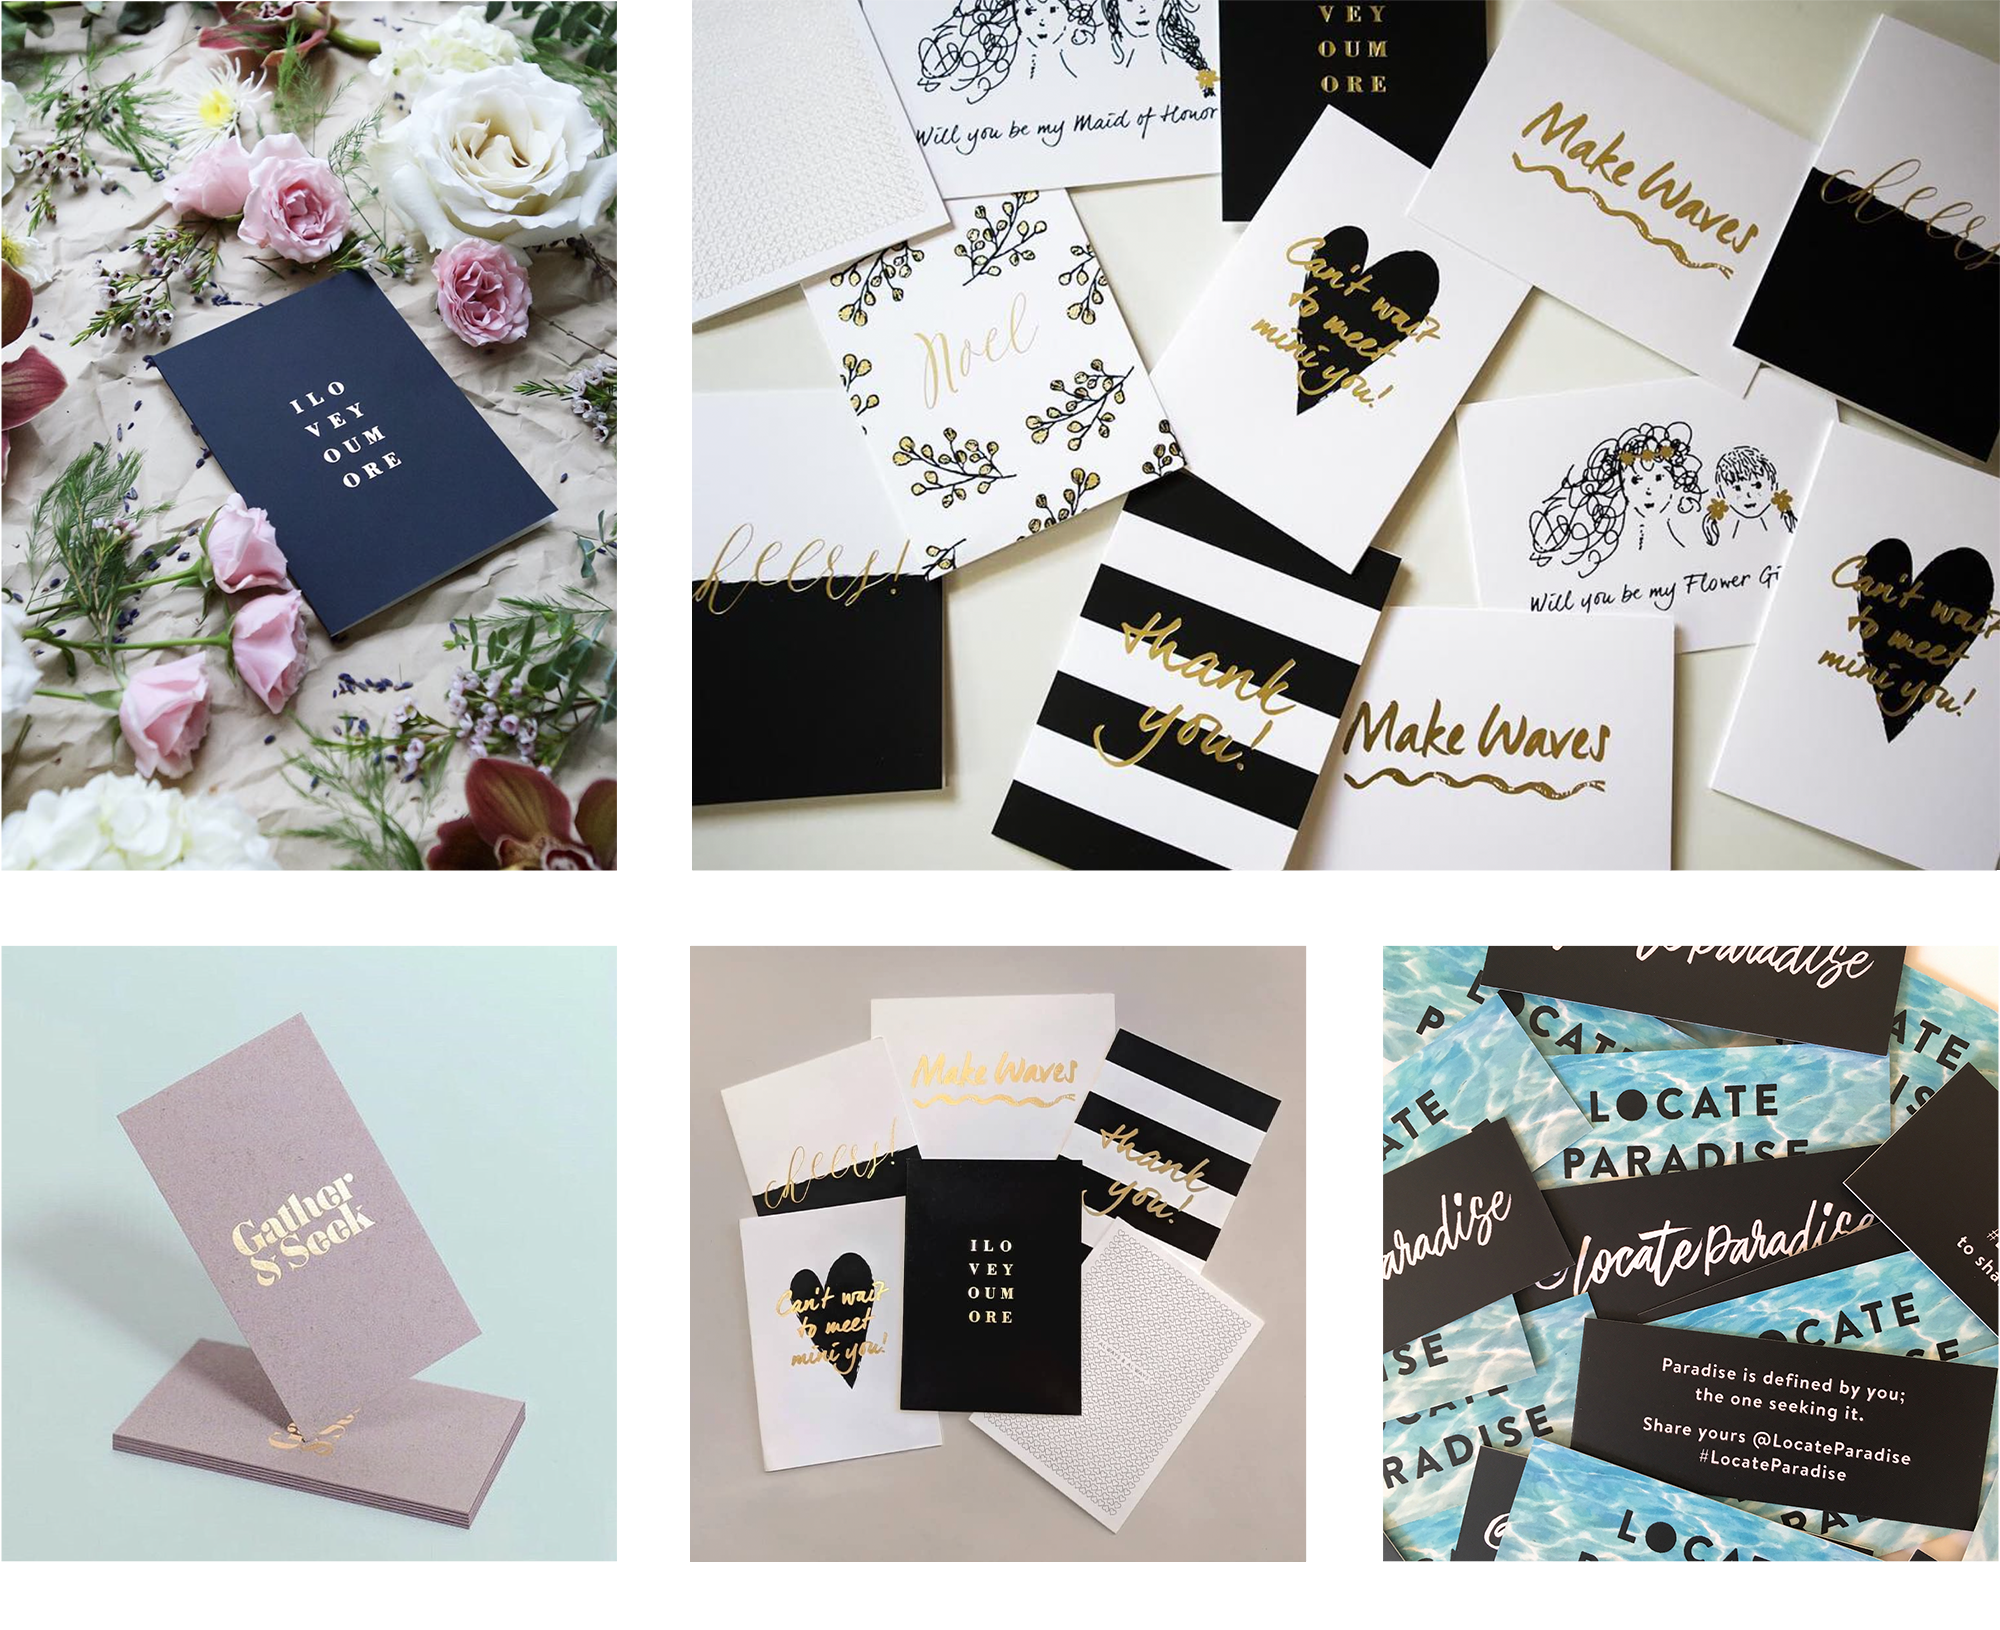 Black, white & gold foiled greeting cards designed by Gather & Seek (formerly Chelley Co.), next to gold foiled Gather & Seek business card on gray paper with a blue backdrop, and black & white Locate Paradise mini business cards.